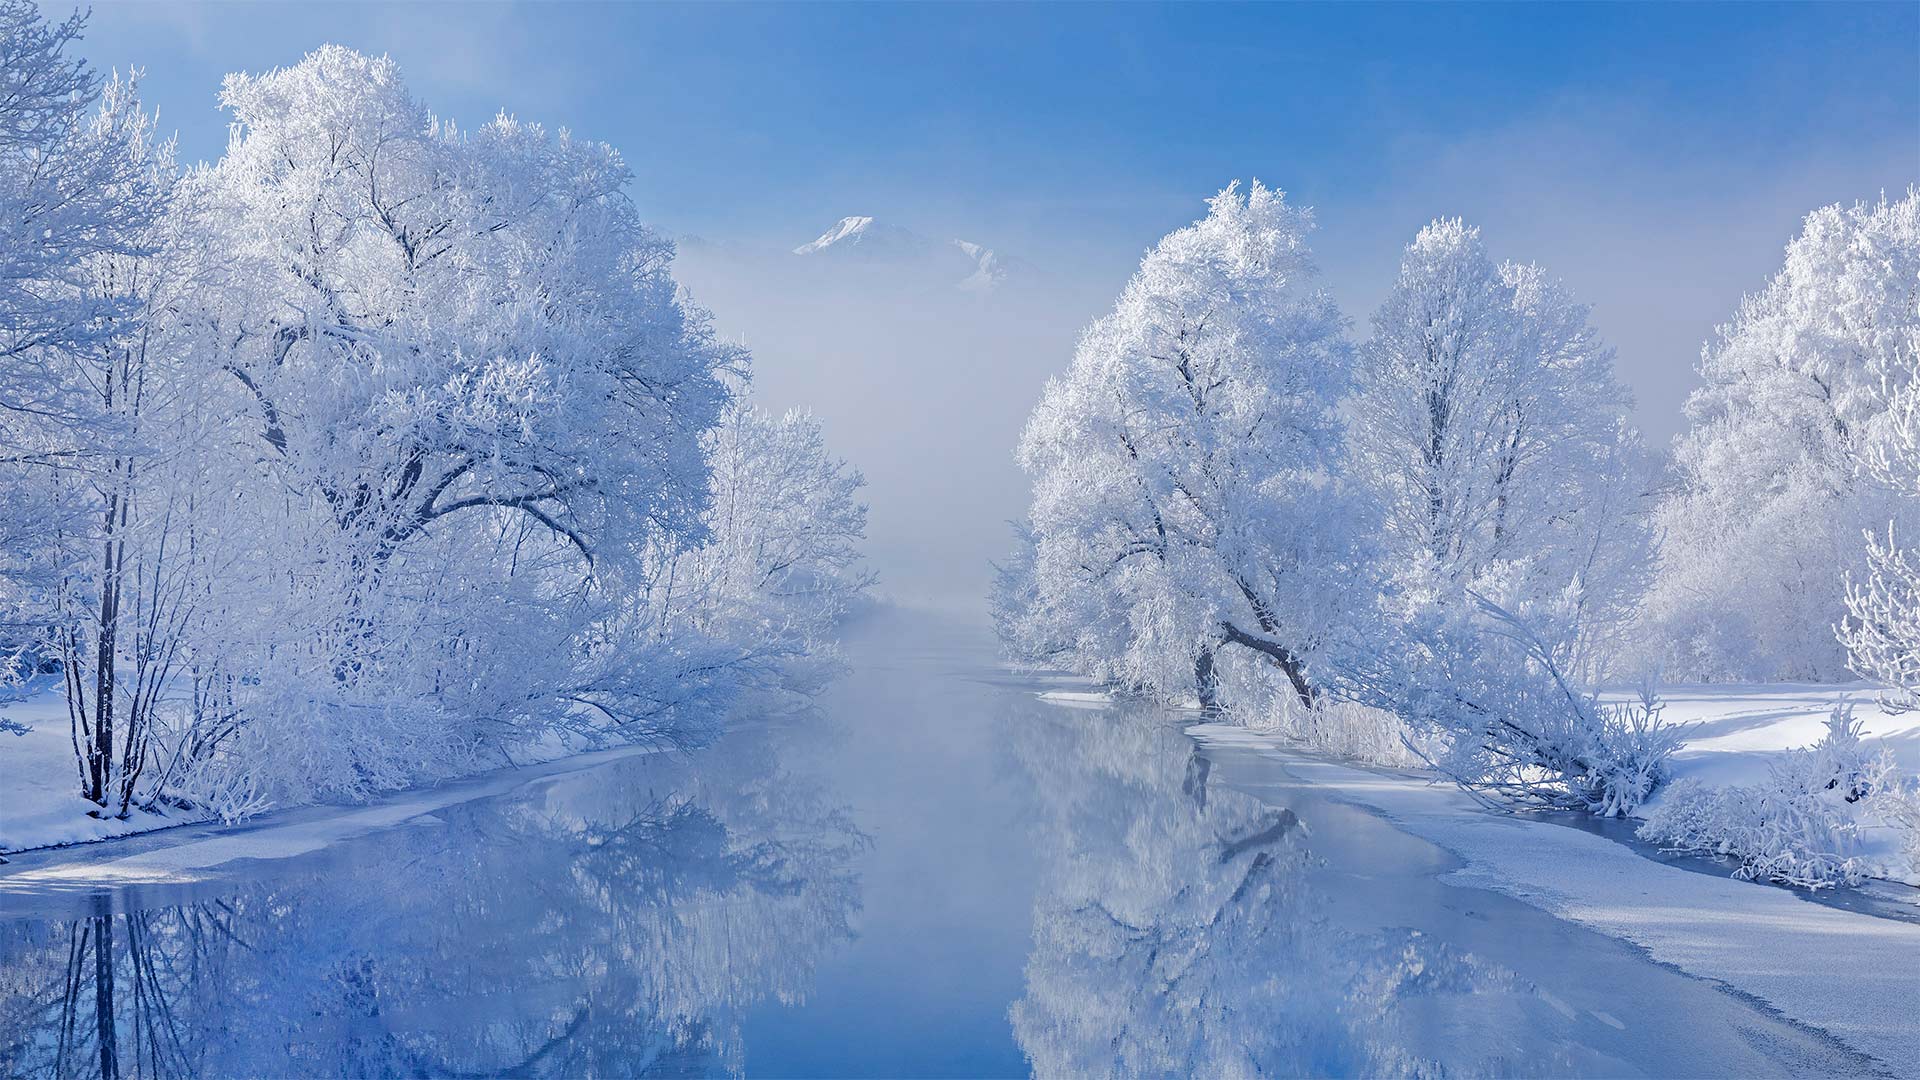 General 1920x1080 Bing nature landscape trees snow frost river winter